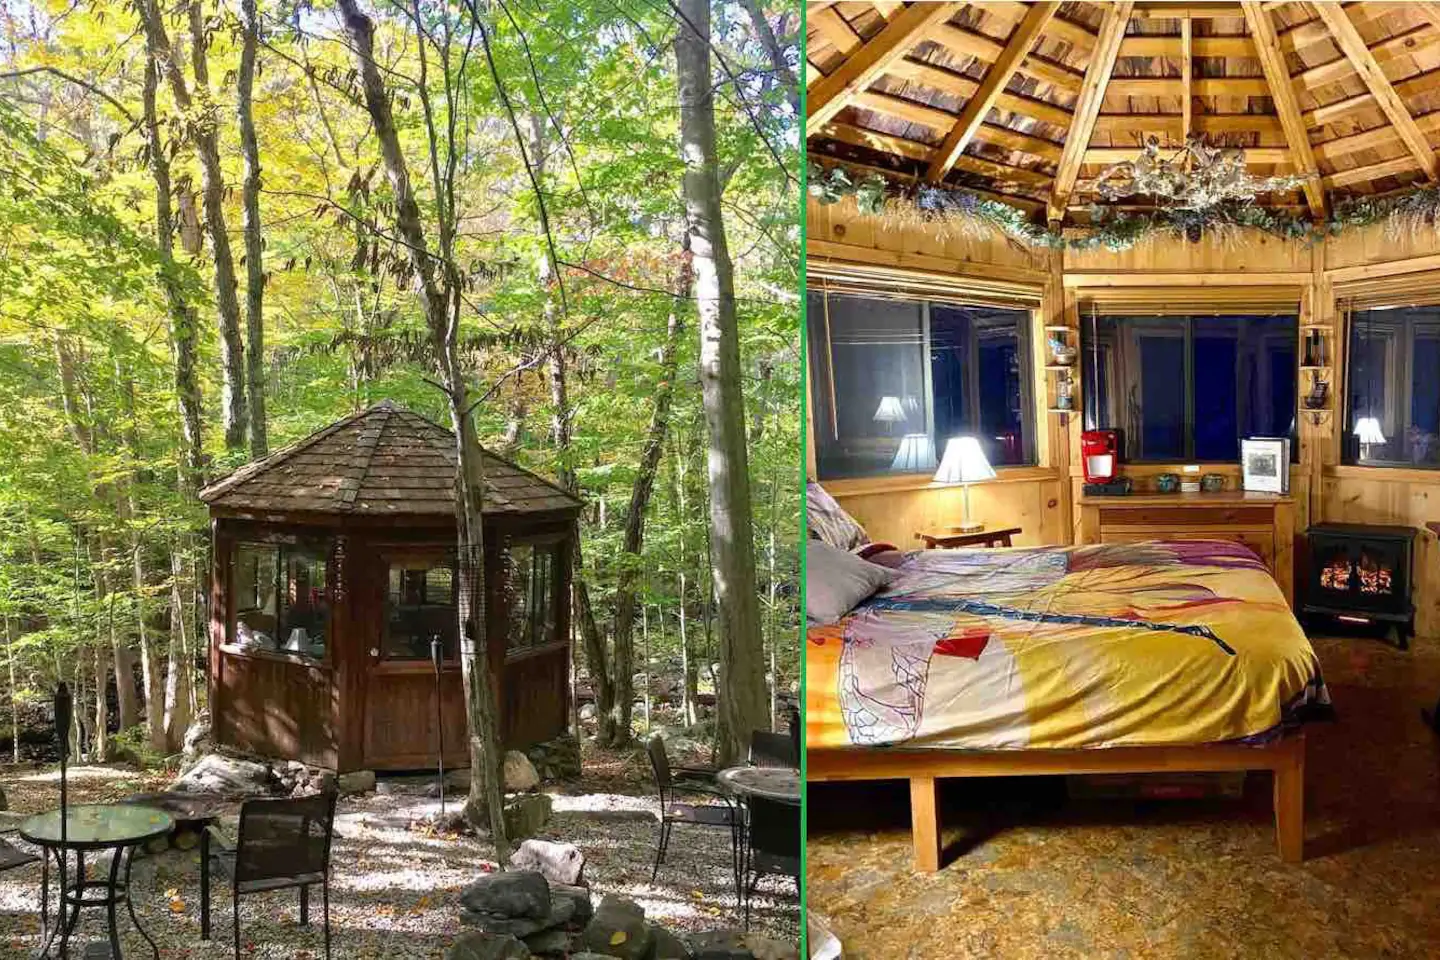 Juxtaposition of two images next to each other. The left image is the exterior of a brown cylindrical cabin in the woods. The right image is the interior of the cabin, featuring a bed and a high vaulted ceiling.